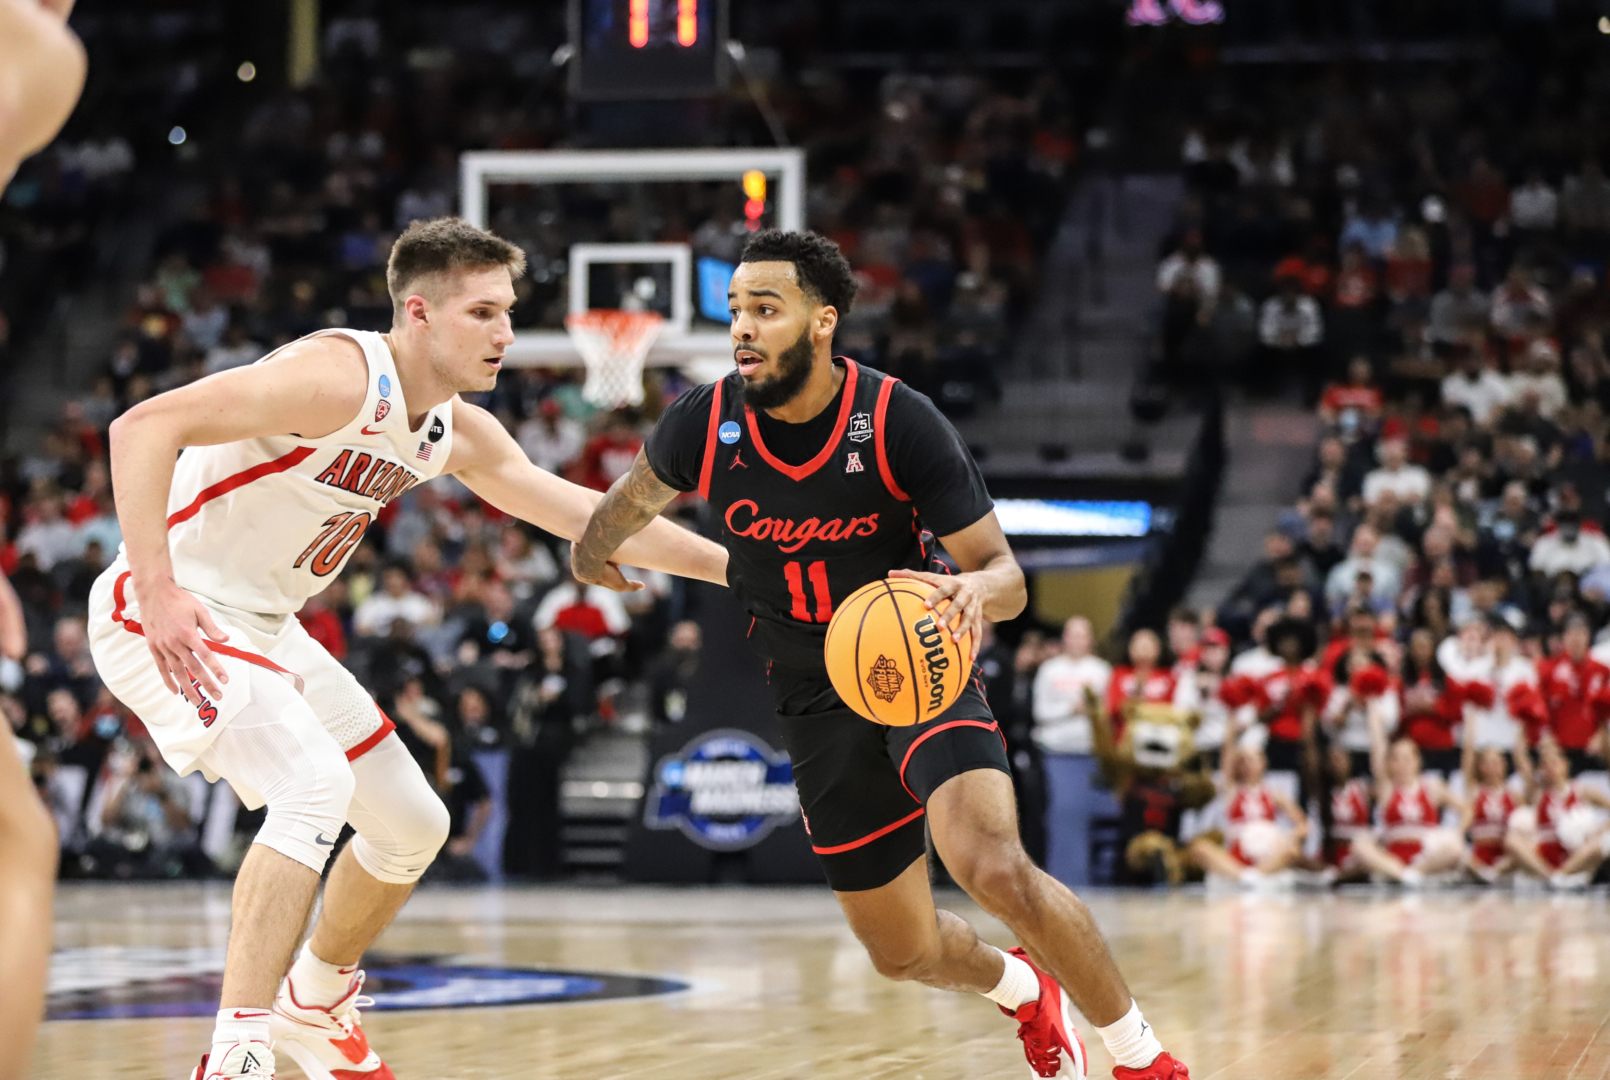 UH guard Kyler Edwards was red-hot from deep in the Sweet 16, hitting 5 3-pointers in the Cougars' victory over Arizona on Thursday night at AT&T Center in San Antonio. | Sean Thomas/The Cougar